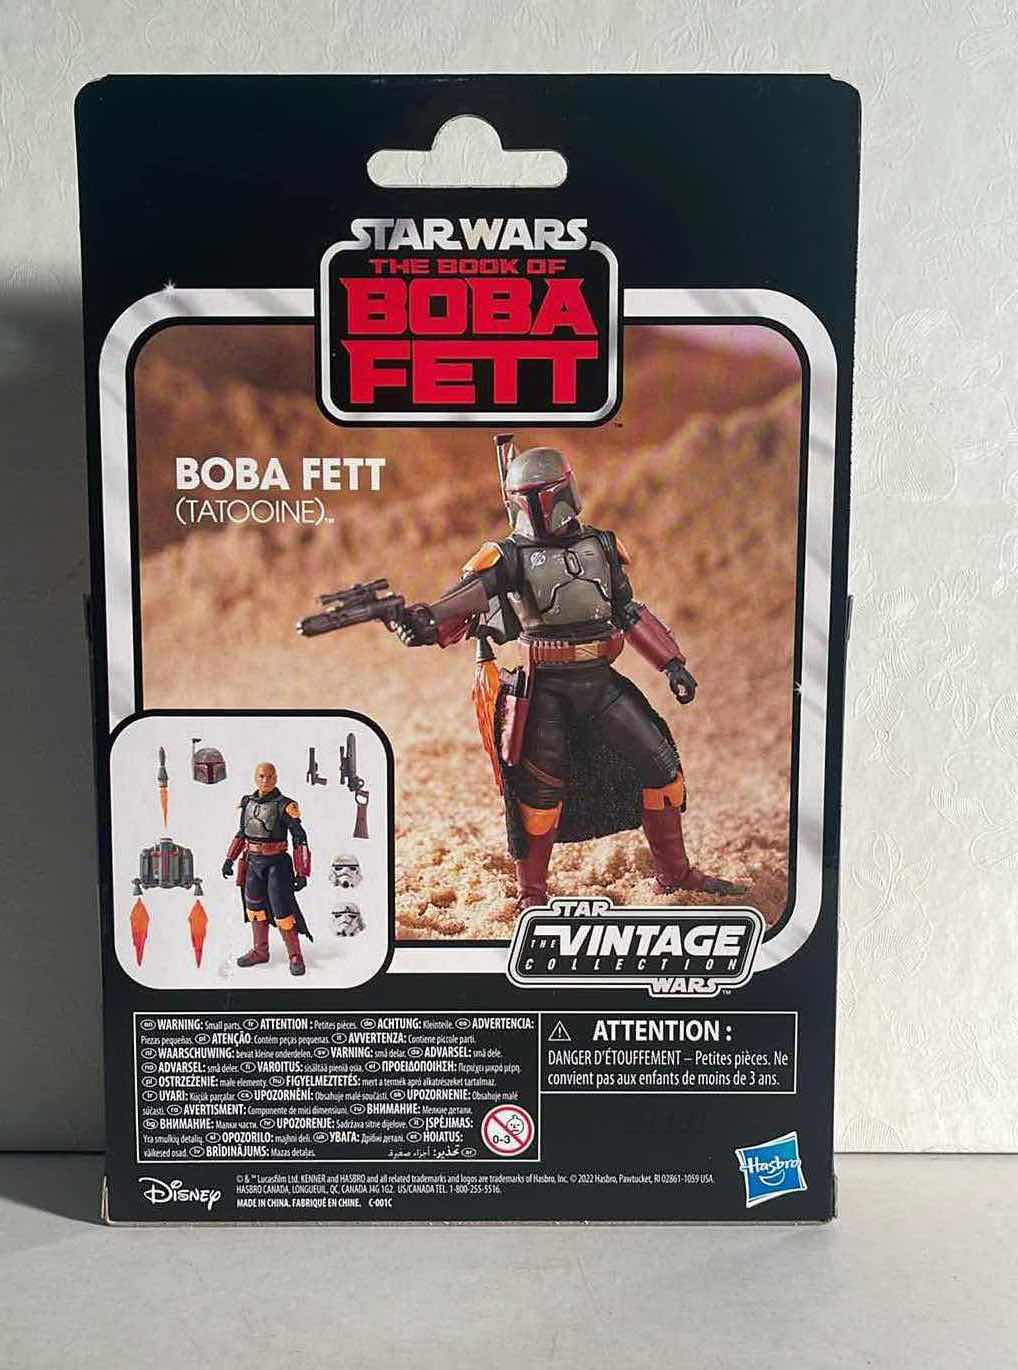 Photo 2 of NIB STAR WARS DELUXE BOBA FETT TATTOOINE VINTAGE COLLECTION ACTION FIGURE - RETAIL PRICE $35.00